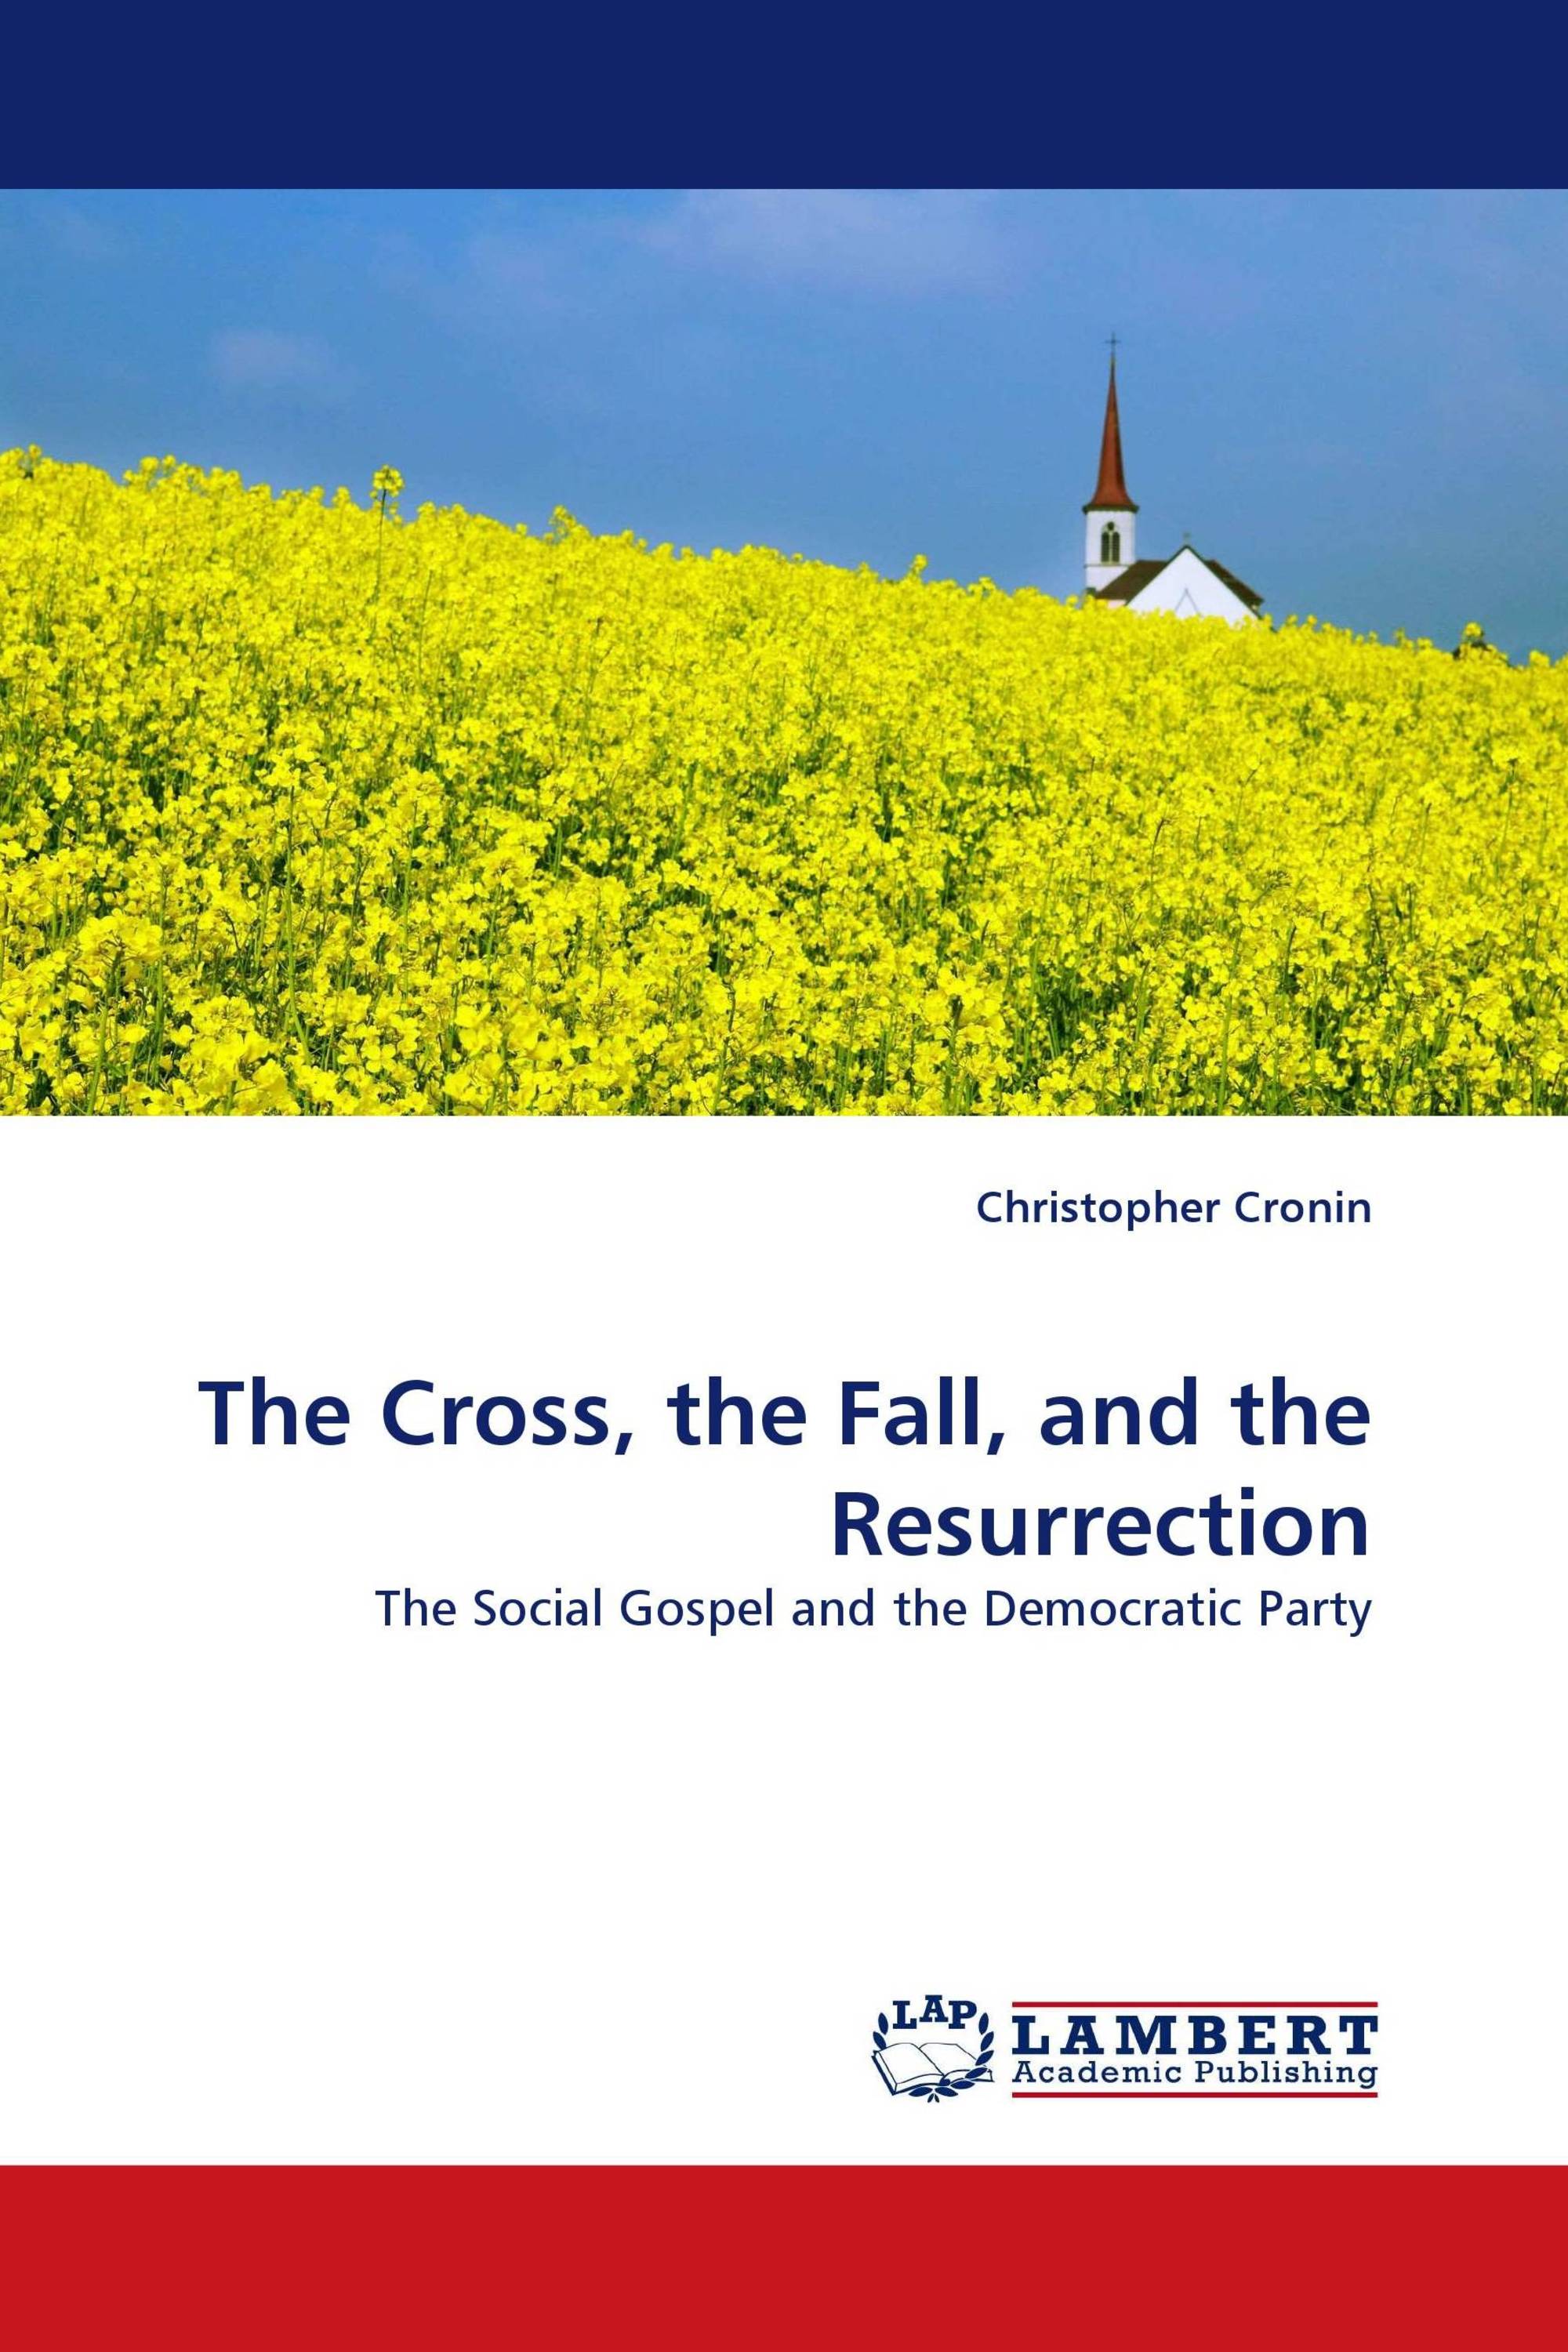 The Cross, the Fall, and the Resurrection